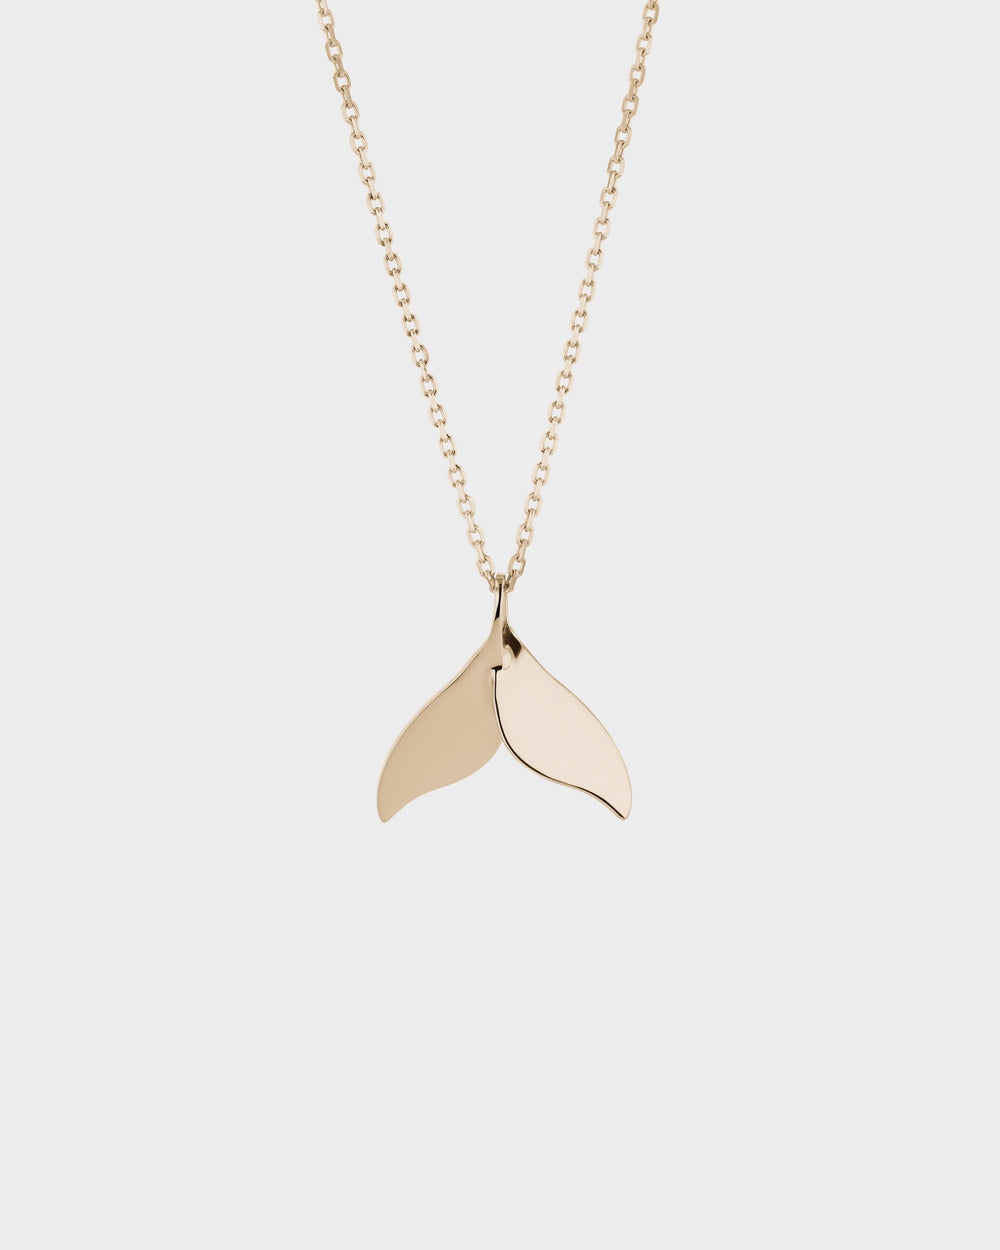 Whale Tail Necklace-Gold - Nantucket Kids